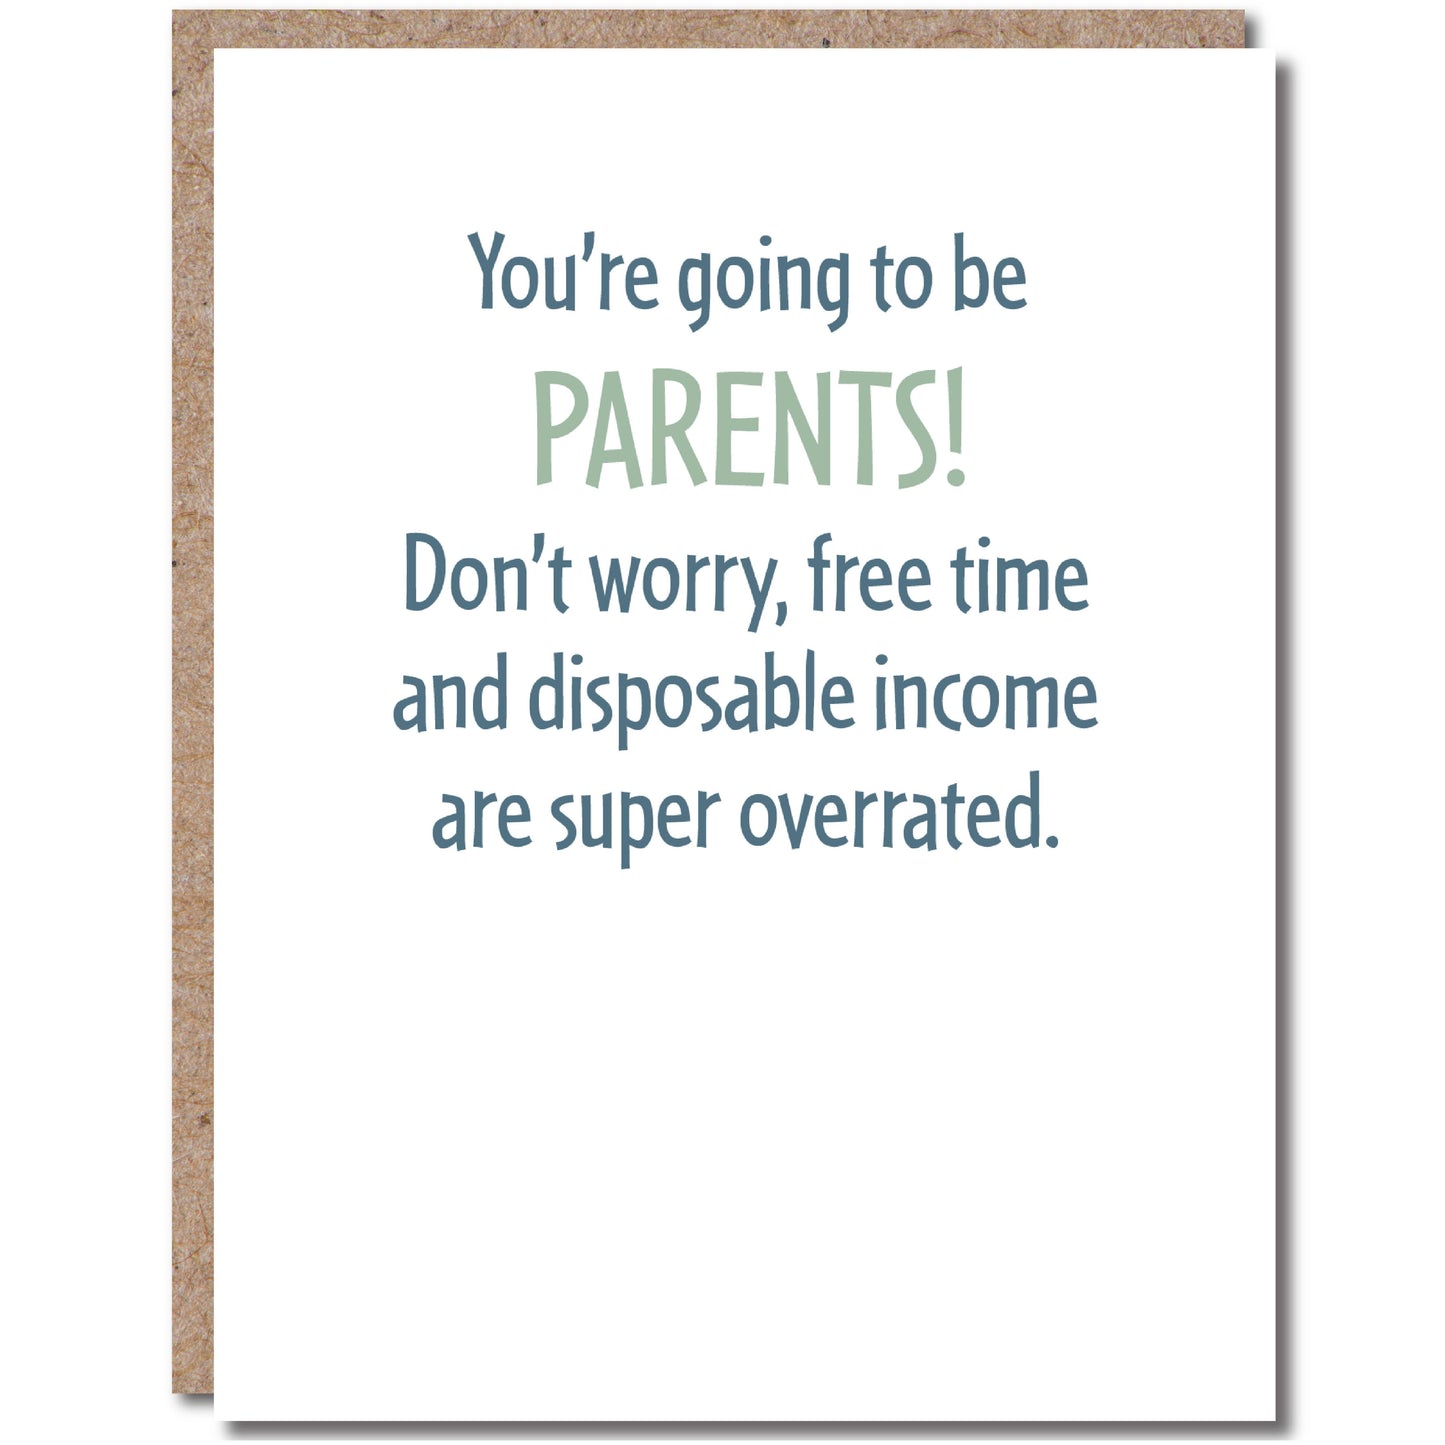 New Baby Card Funny - Going to be Parents